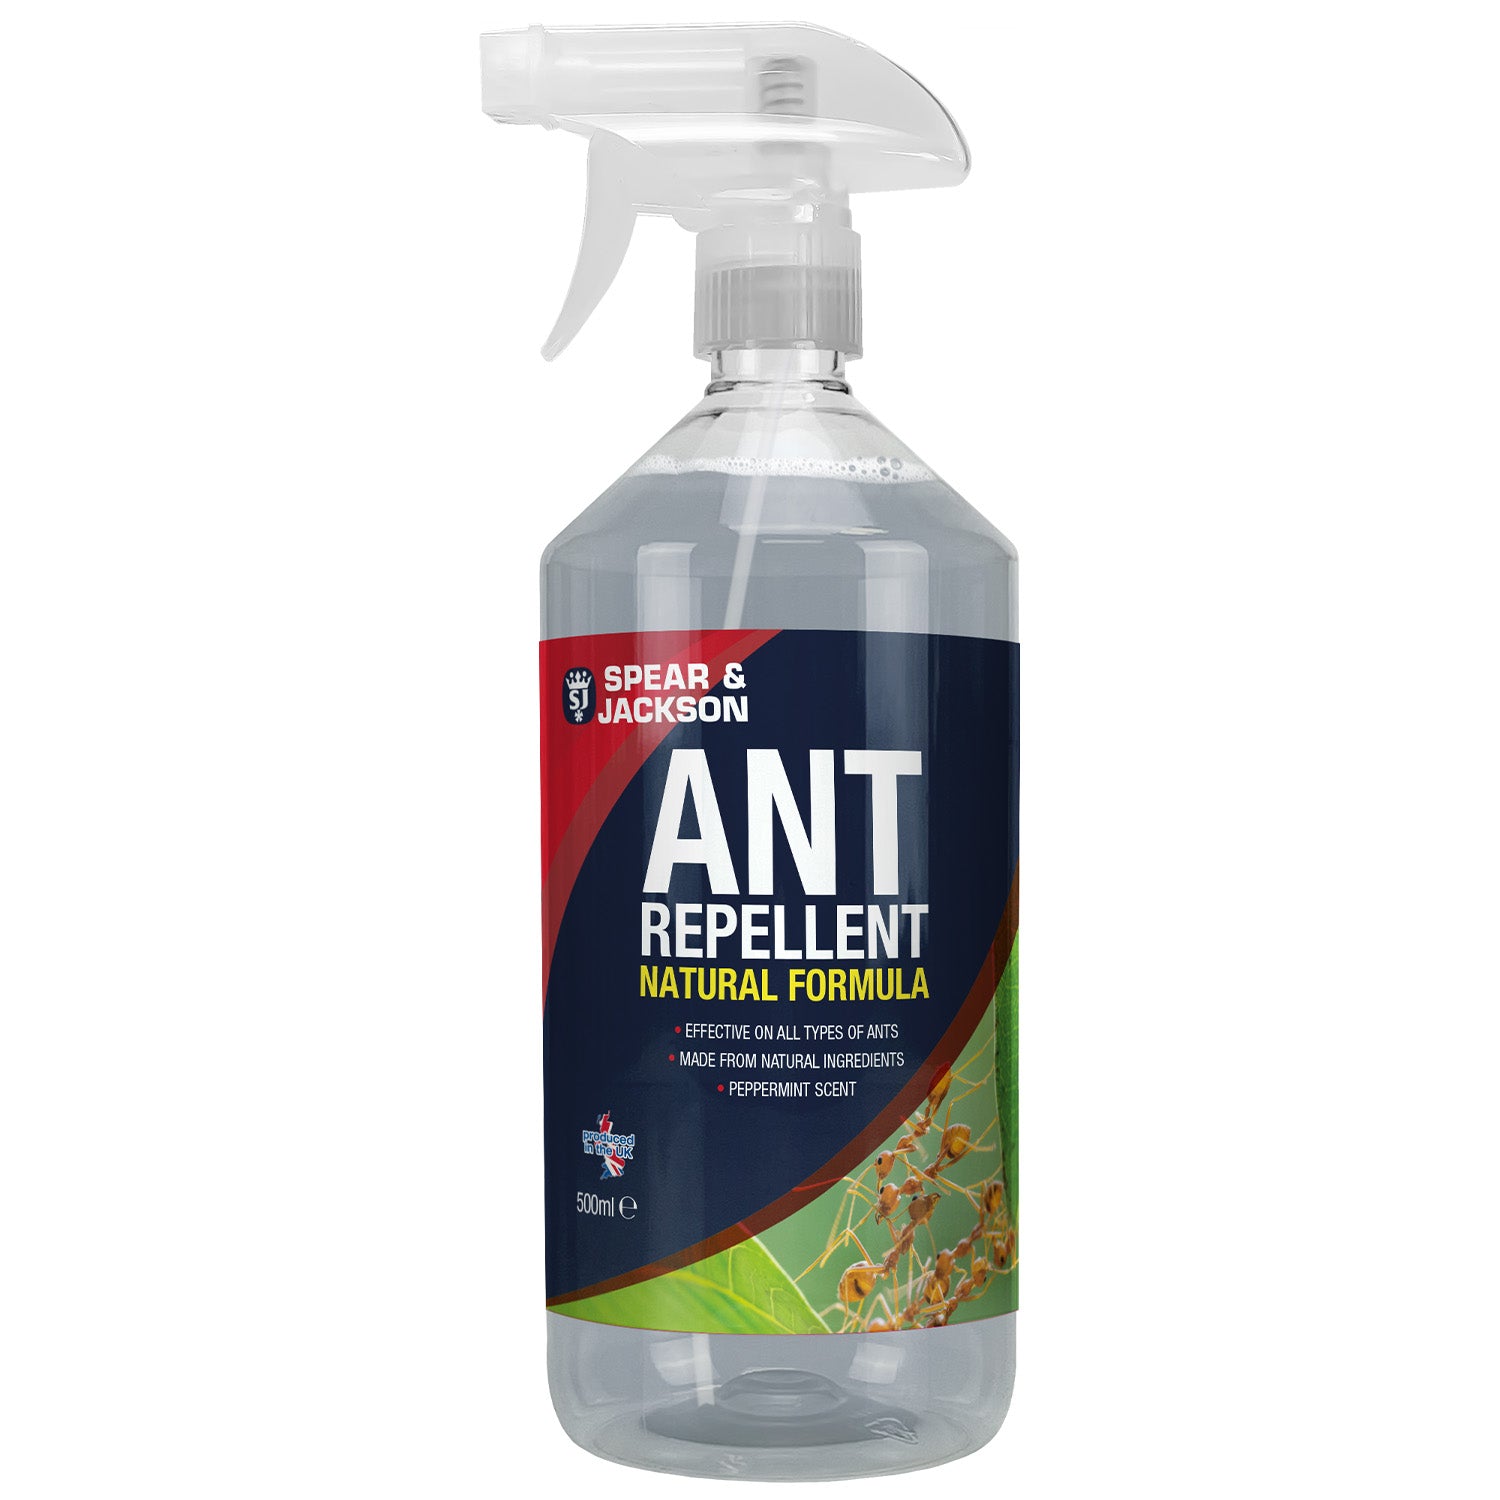 Ant Repellent 500ml Peppermint Scent Spear and Jackson